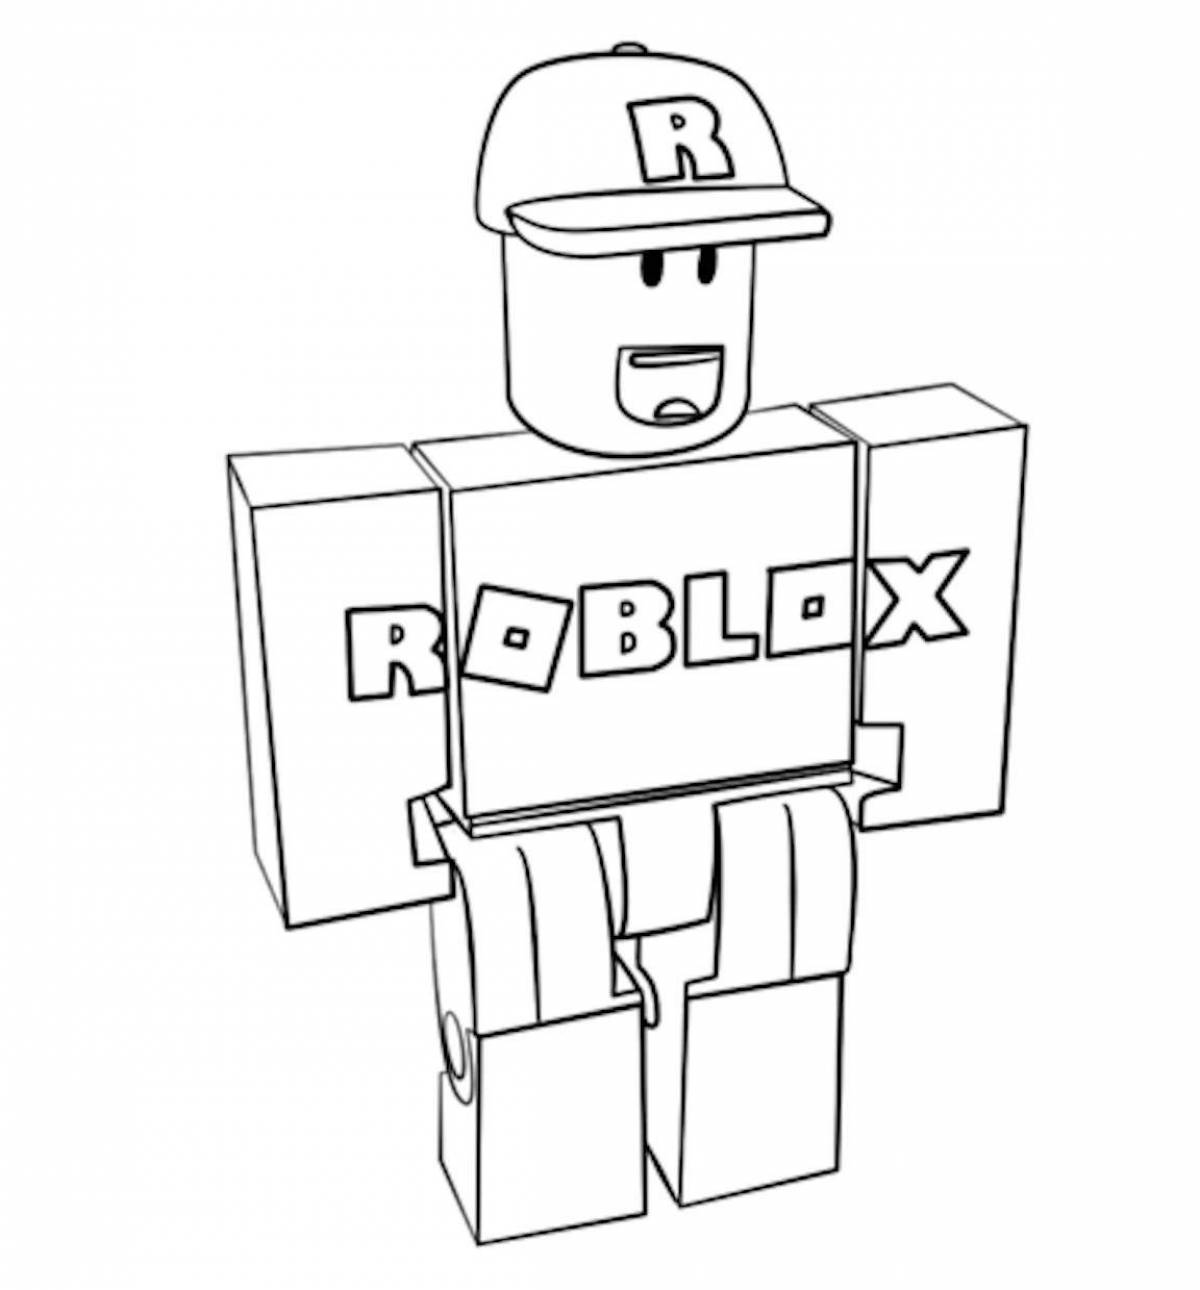 Roblox in good quality #1